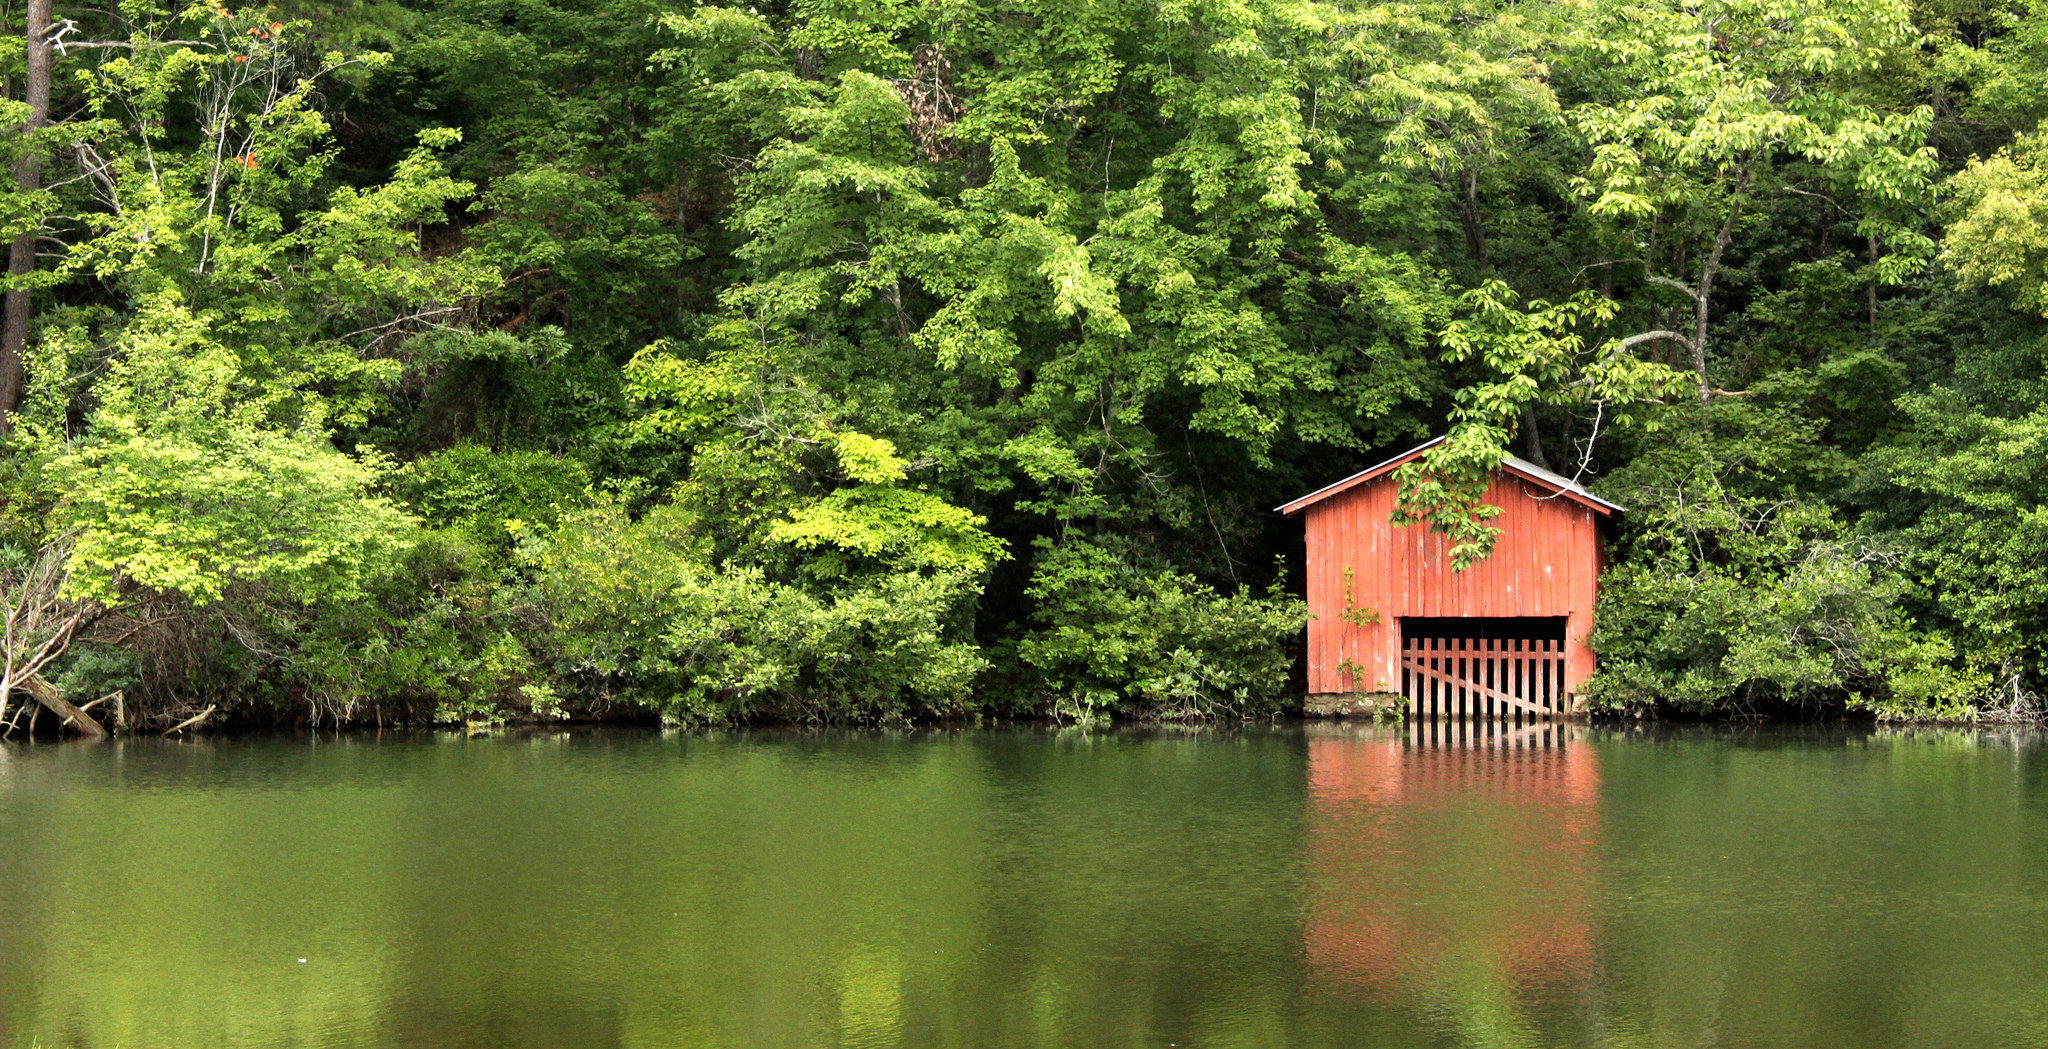 The most photographed boat house in Alabama.